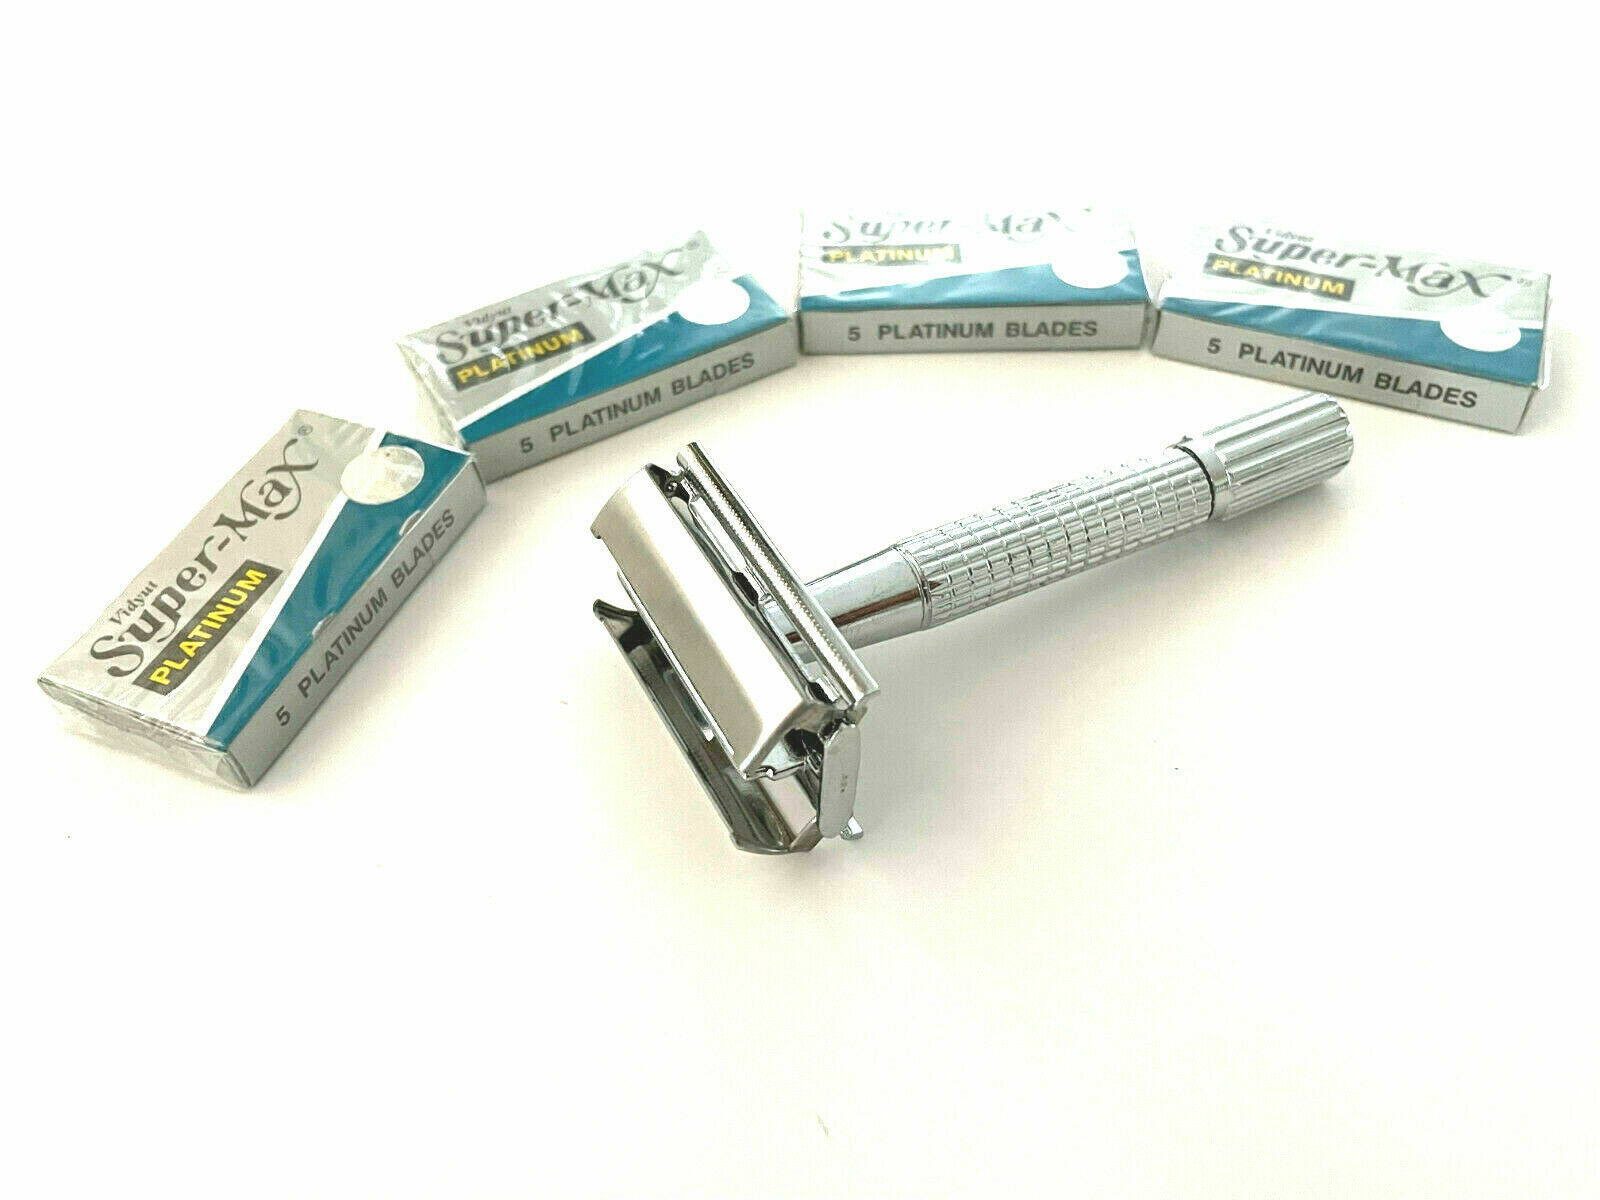 Twist Open Butterfly Safety Razor + 20 Double Edge Blades Classic Shaving Set